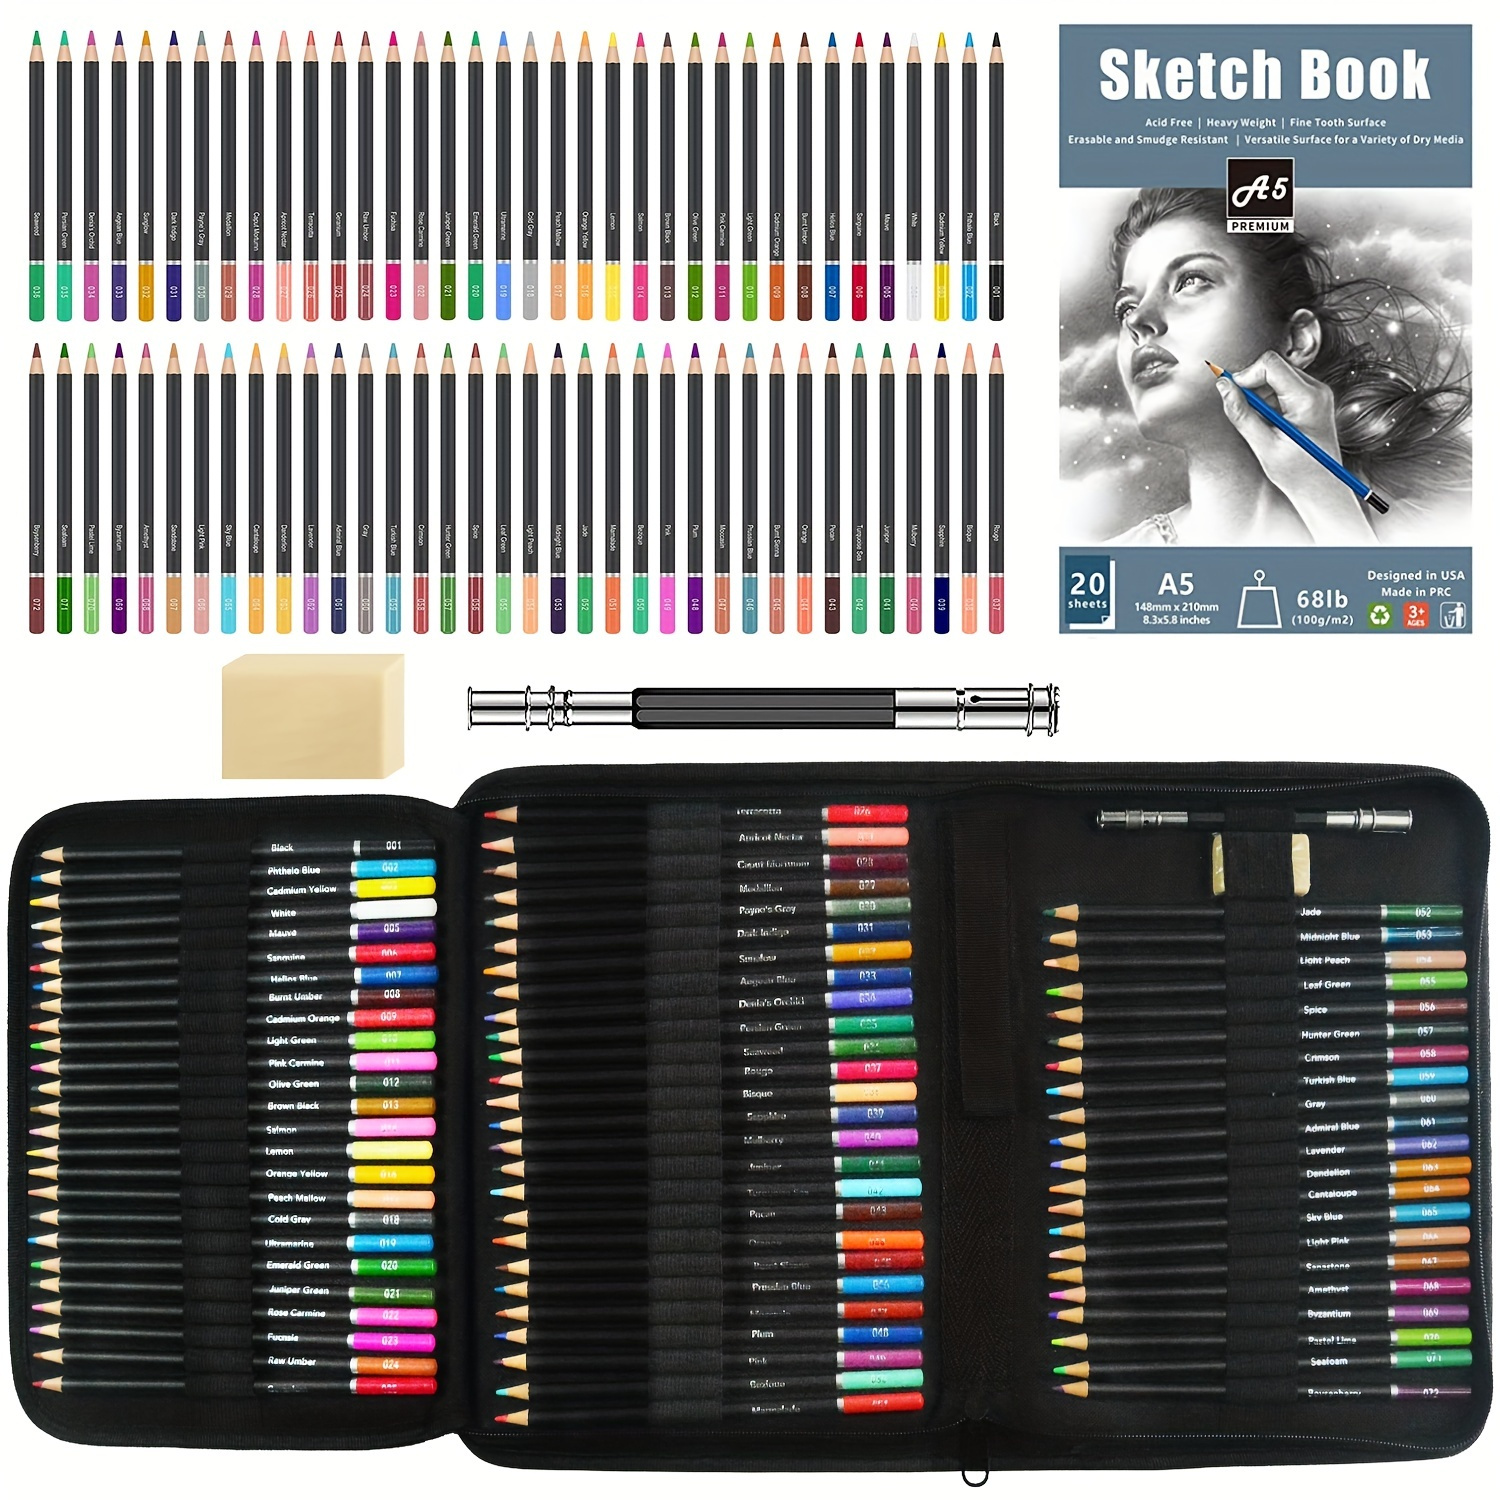  iBayam 78-Pack Drawing Set Sketching Kit, Pro Art Supplies  with 75 Sheets 3-Color Sketch Pad, Coloring Book, Charcoal, Metallic,  Colored Watercolor, Graphite Pencils for Artists Adults Kids Beginners :  Arts